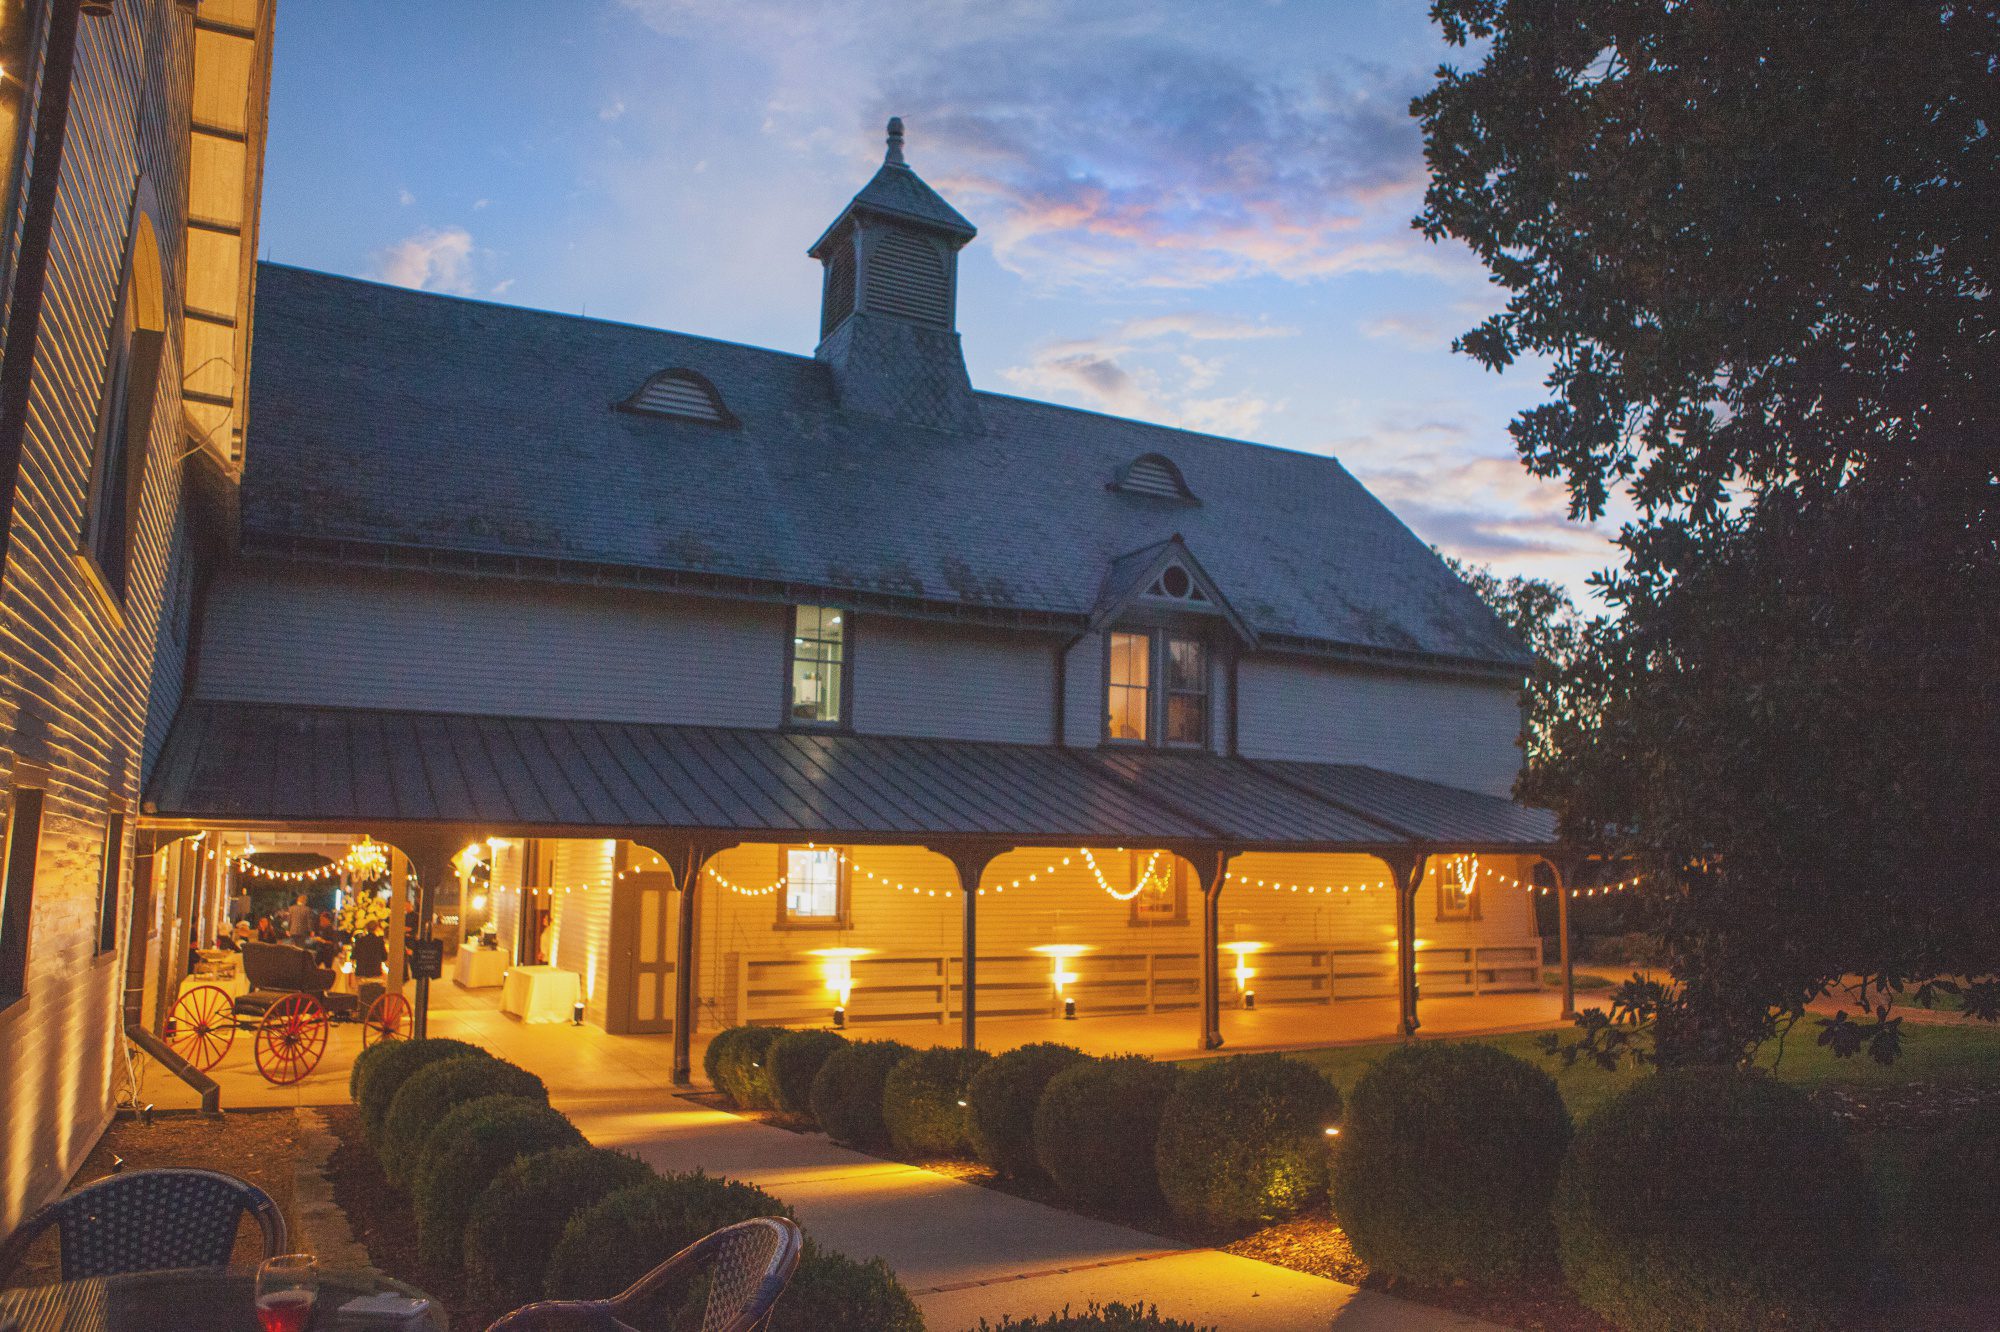 Dusk photo of the historic barn after wedding at Belle Meade Plantation in Nashville, TN. Photos by Krista Lee Photography 